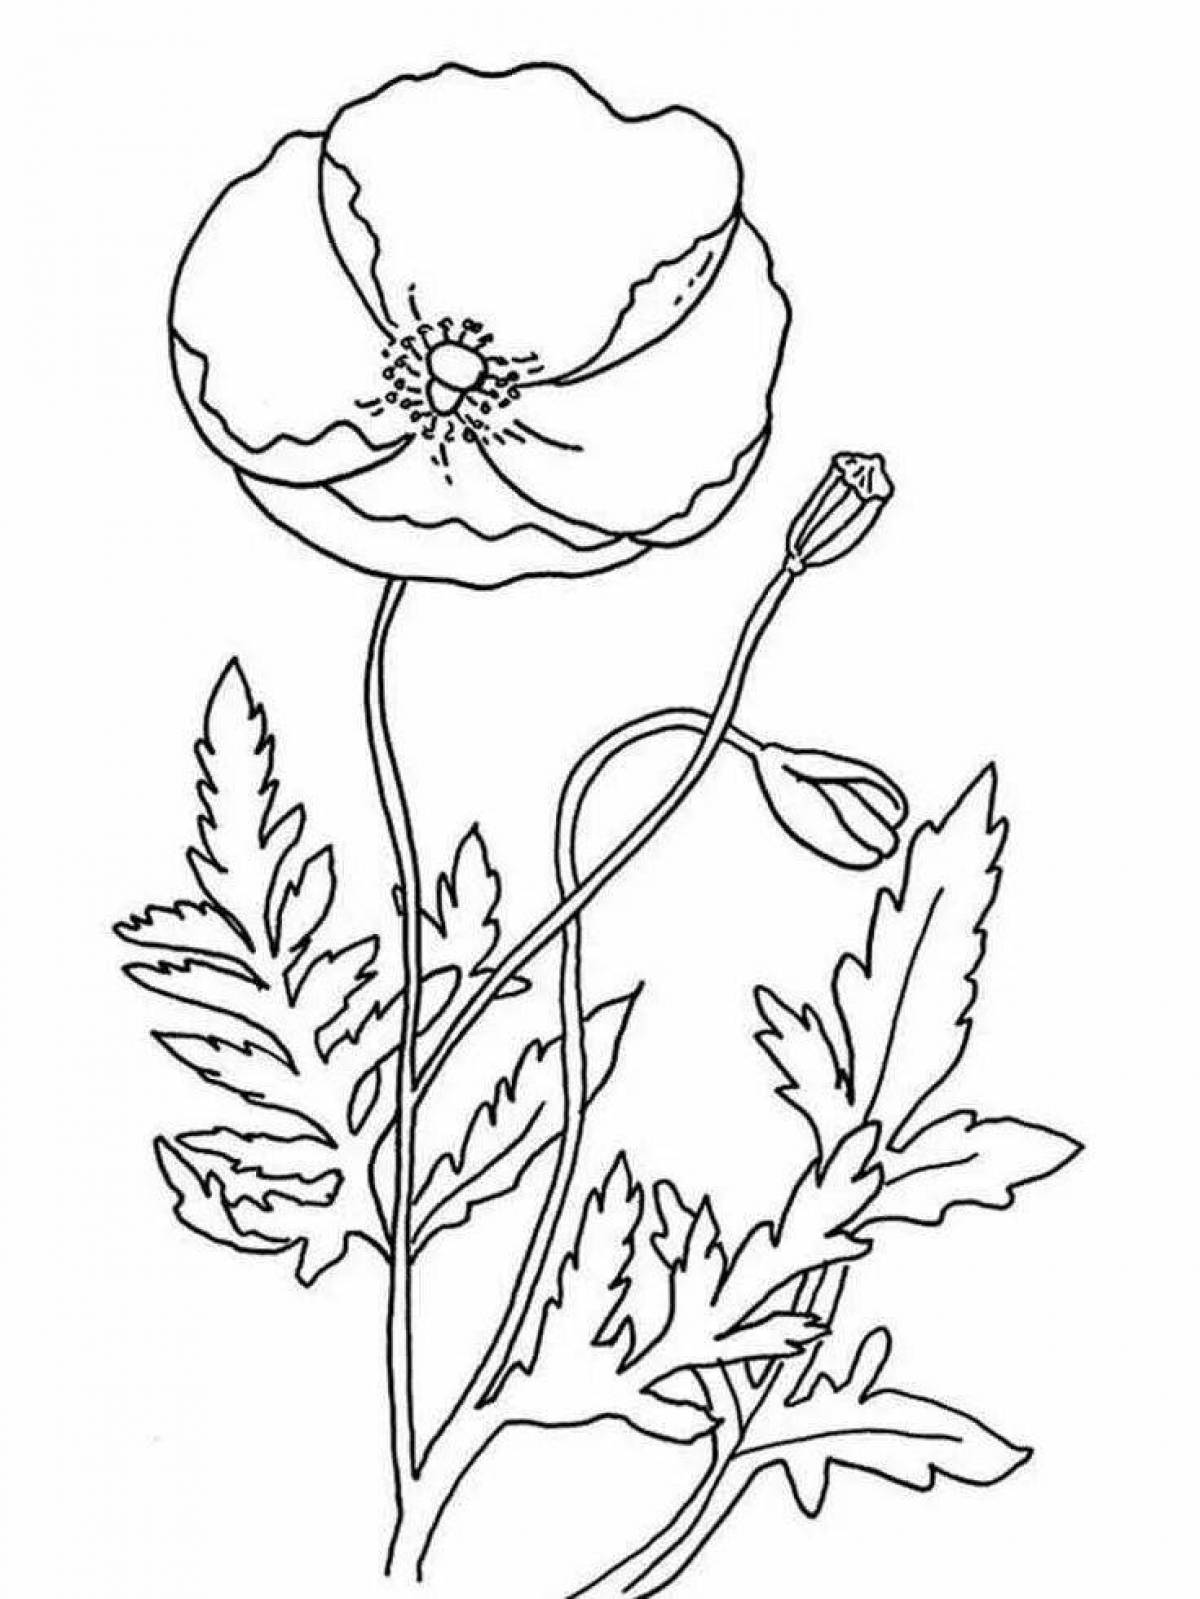 Coloring page playful poppy